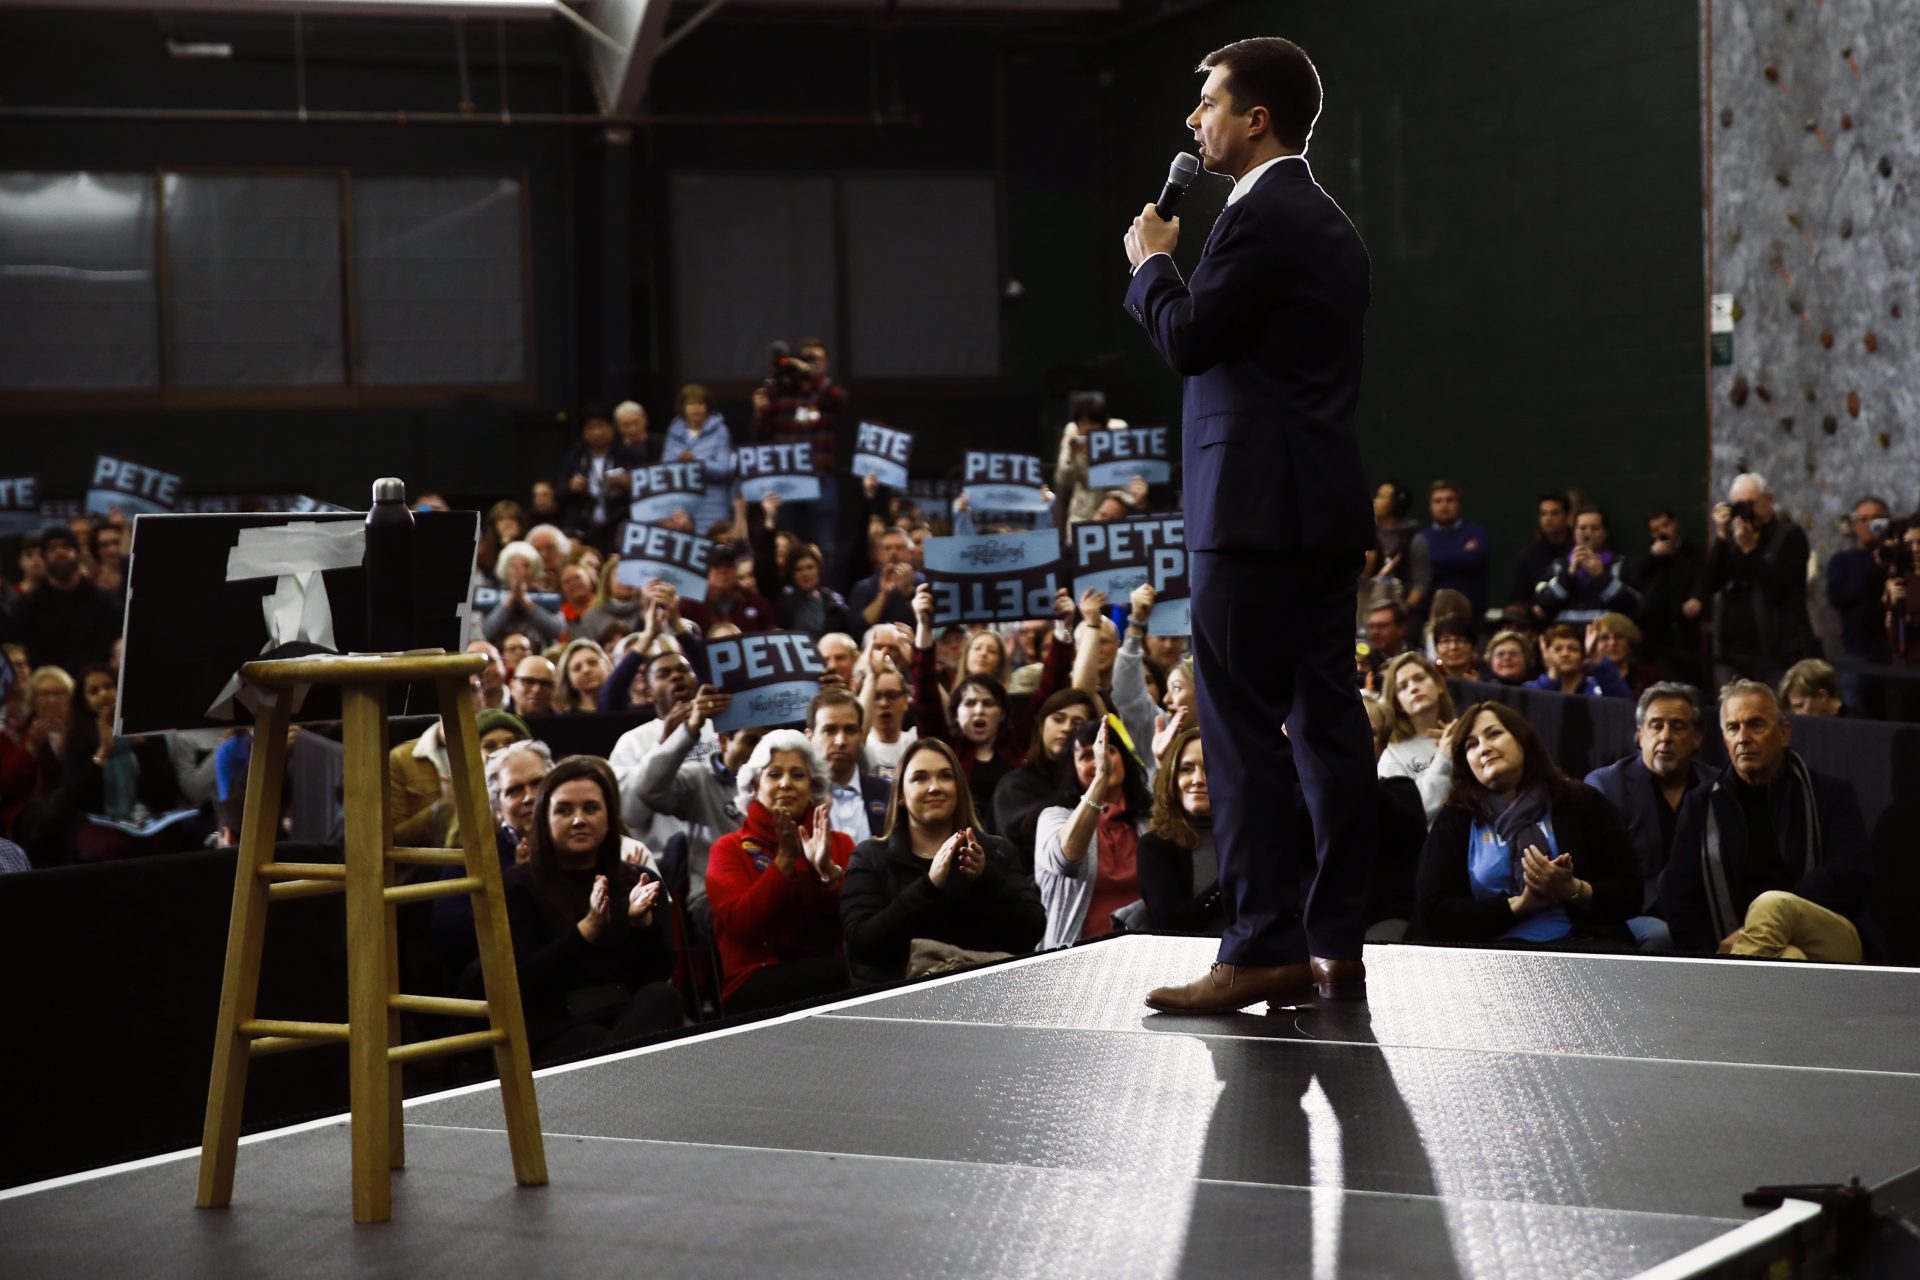 Democratic presidential candidate former South Bend, Ind., Mayor Pete Buttigieg speaks during a campaign event, Monday, Feb. 10, 2020, in Milford, N.H.